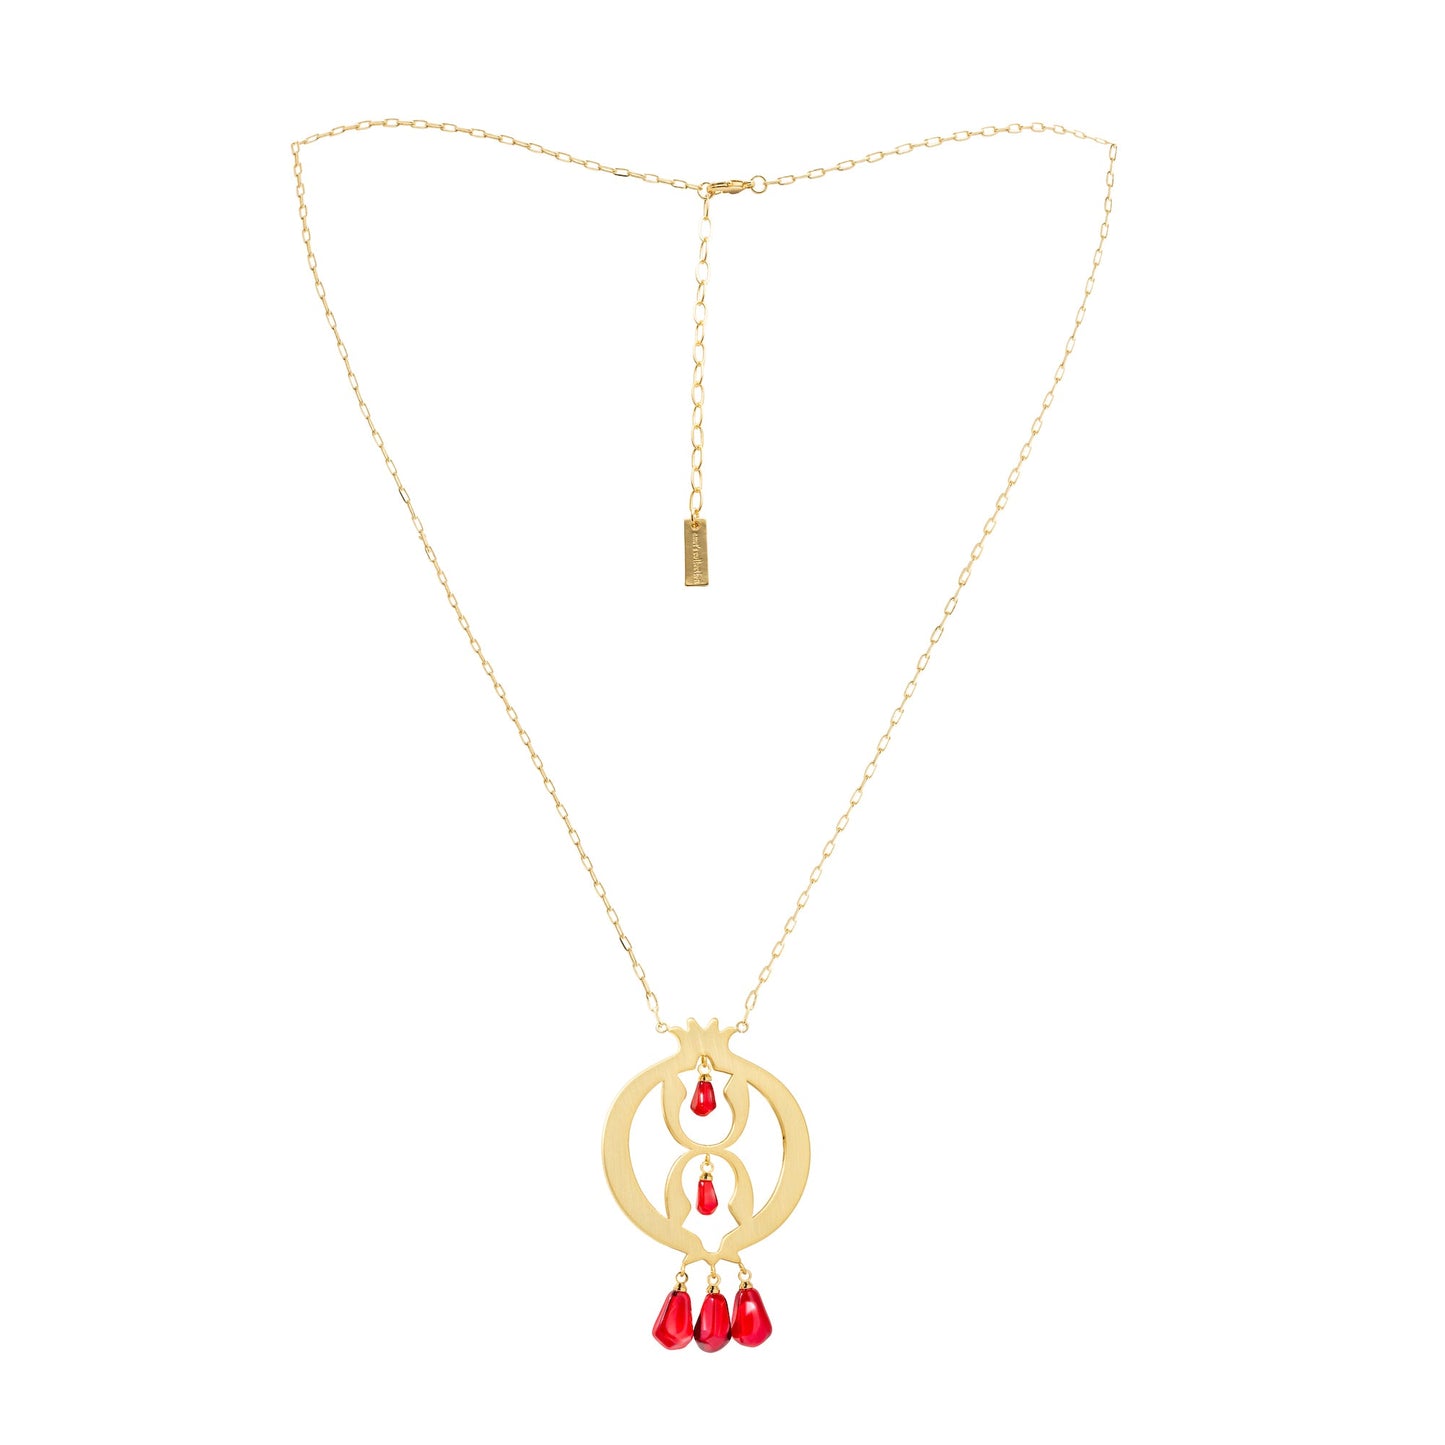 Pomegranate long Necklace - Lusanet Collective